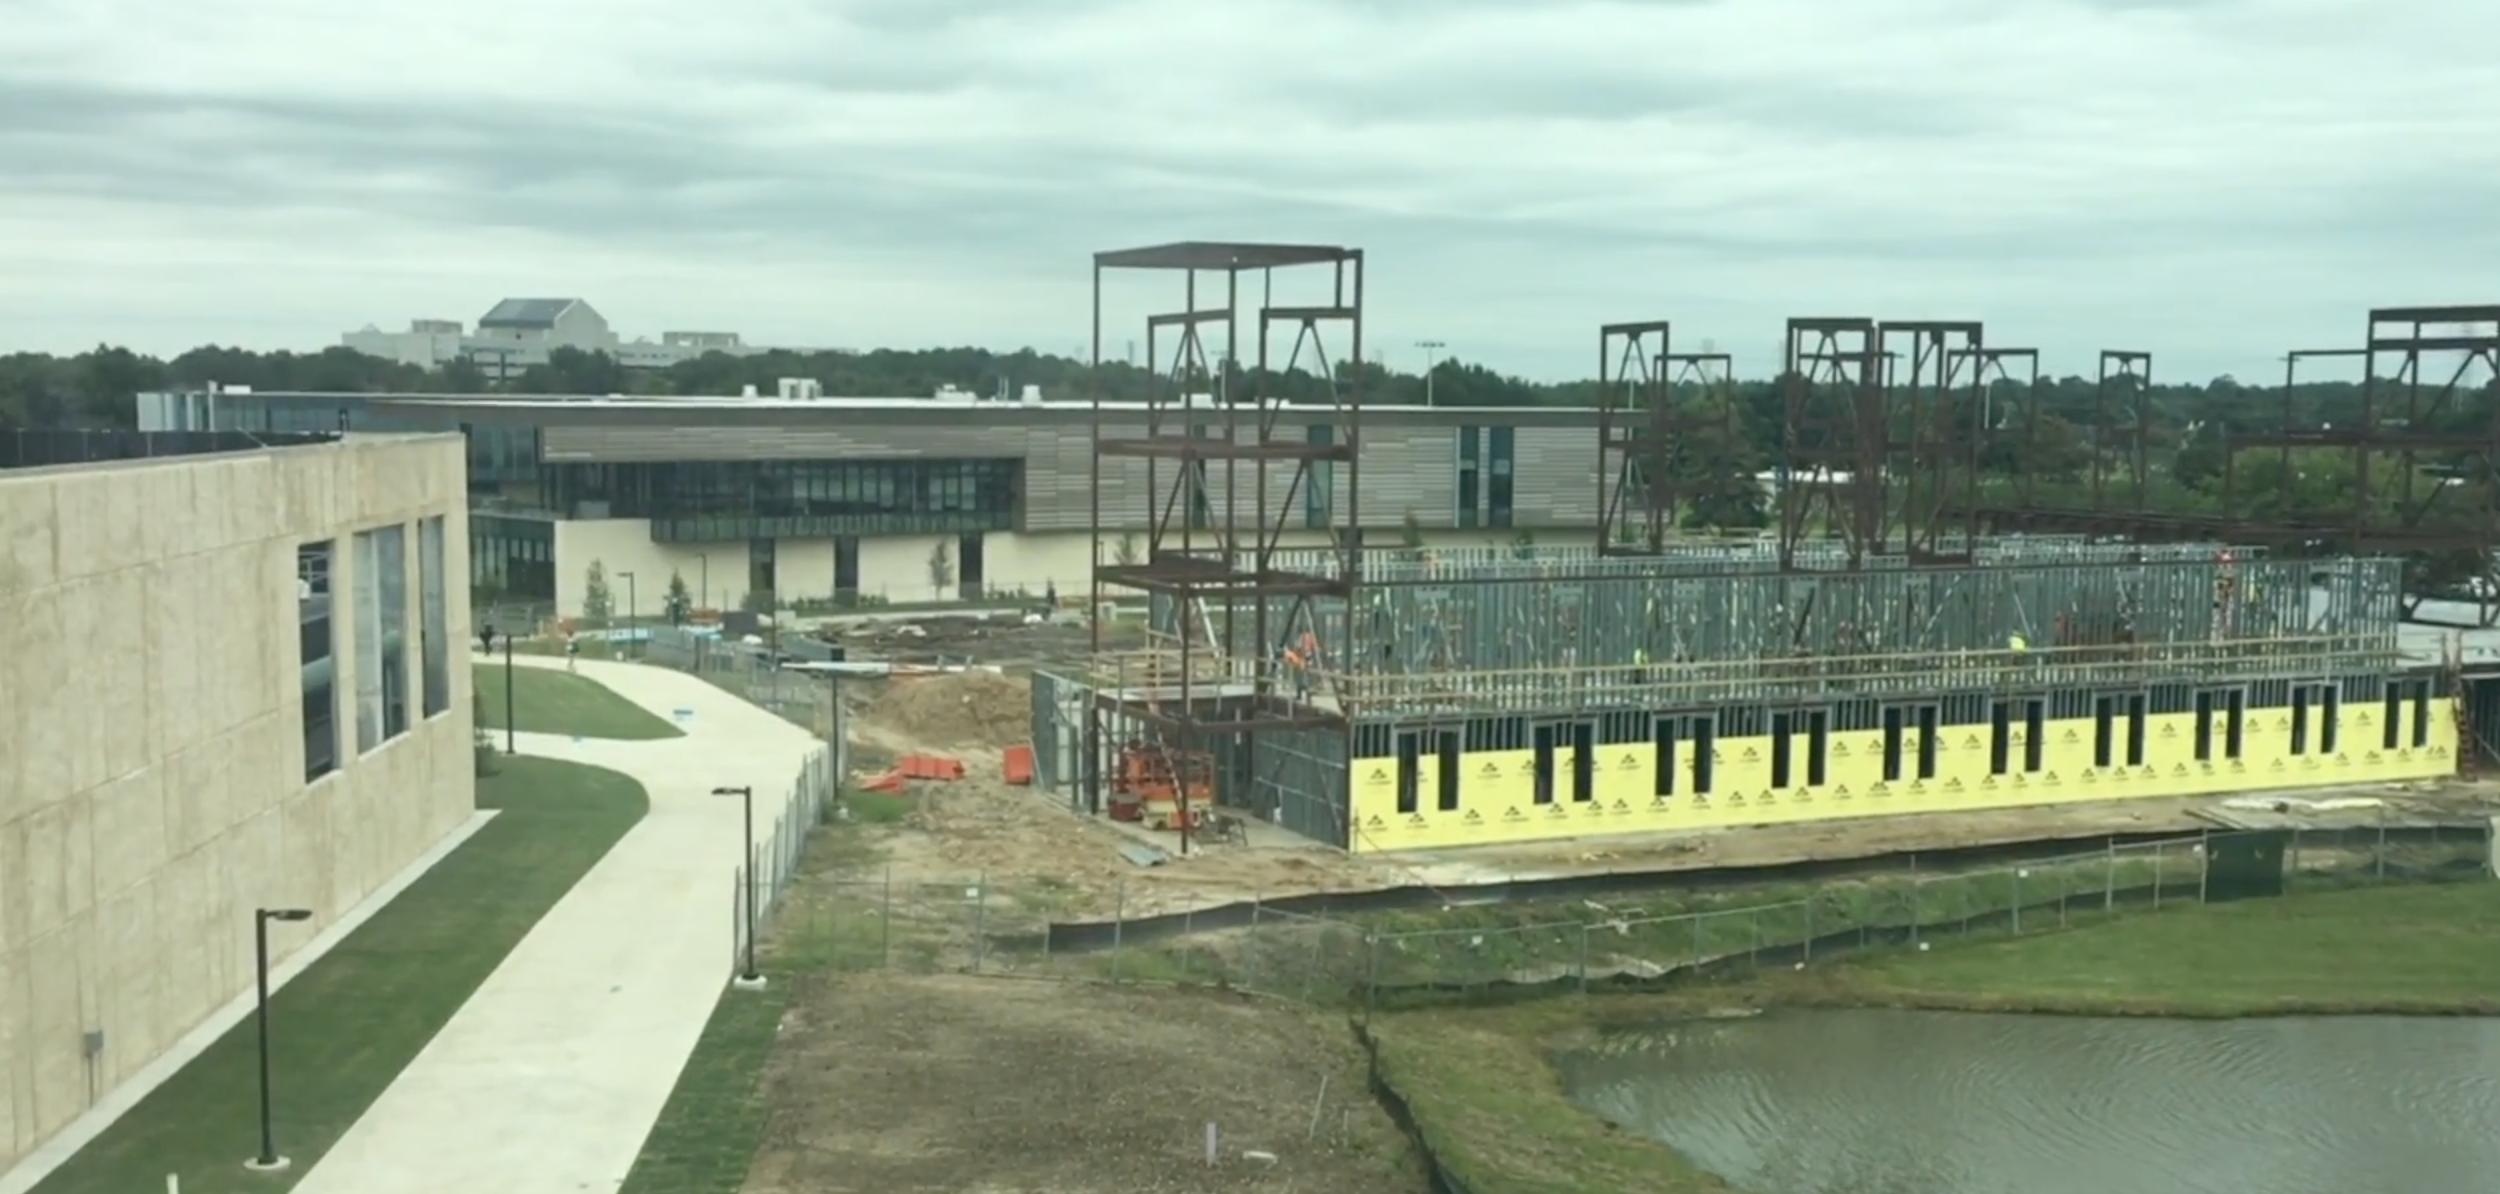 PHOTO: The future residence hall at UHCL has yet to be named. Photo by The Signal reporter Christina Kiesert.